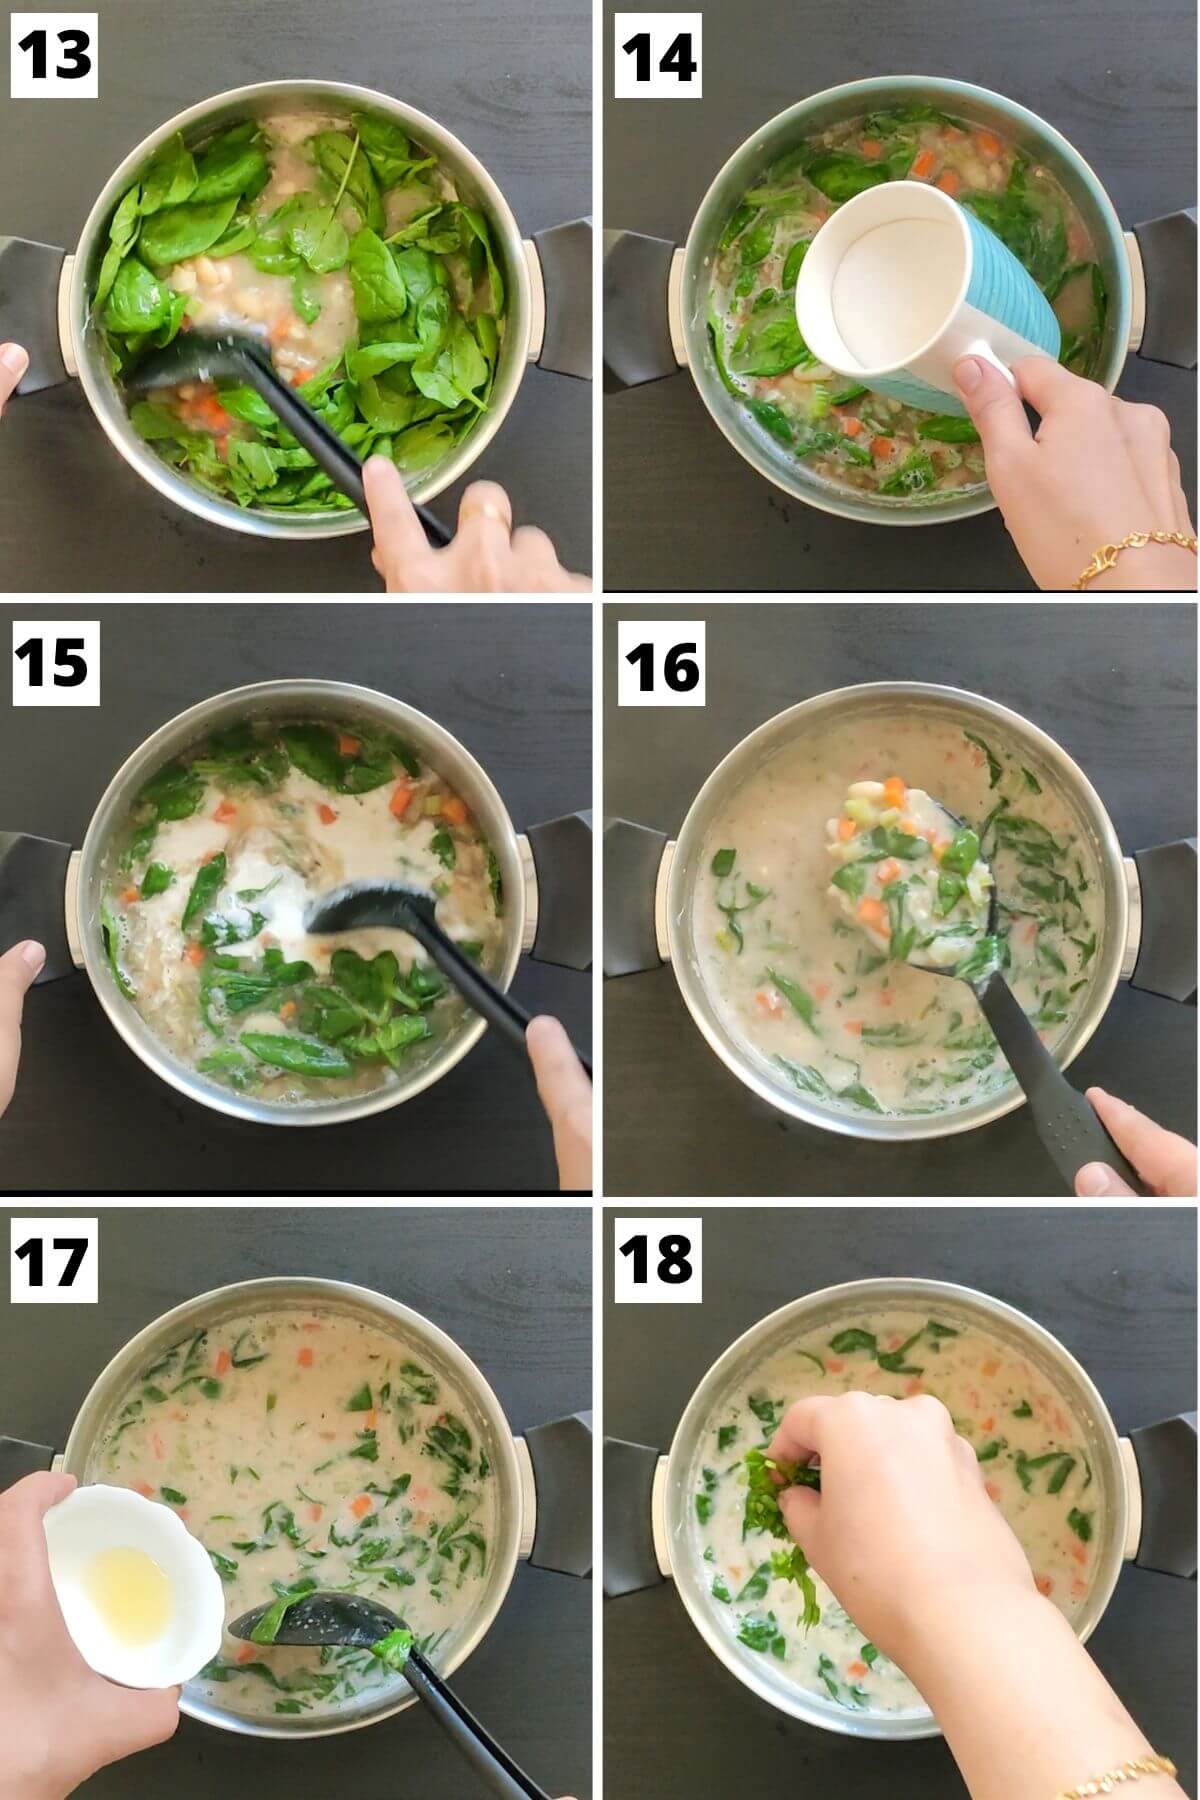 Collage of steps 13 to 18 of cannellini bean soup recipe